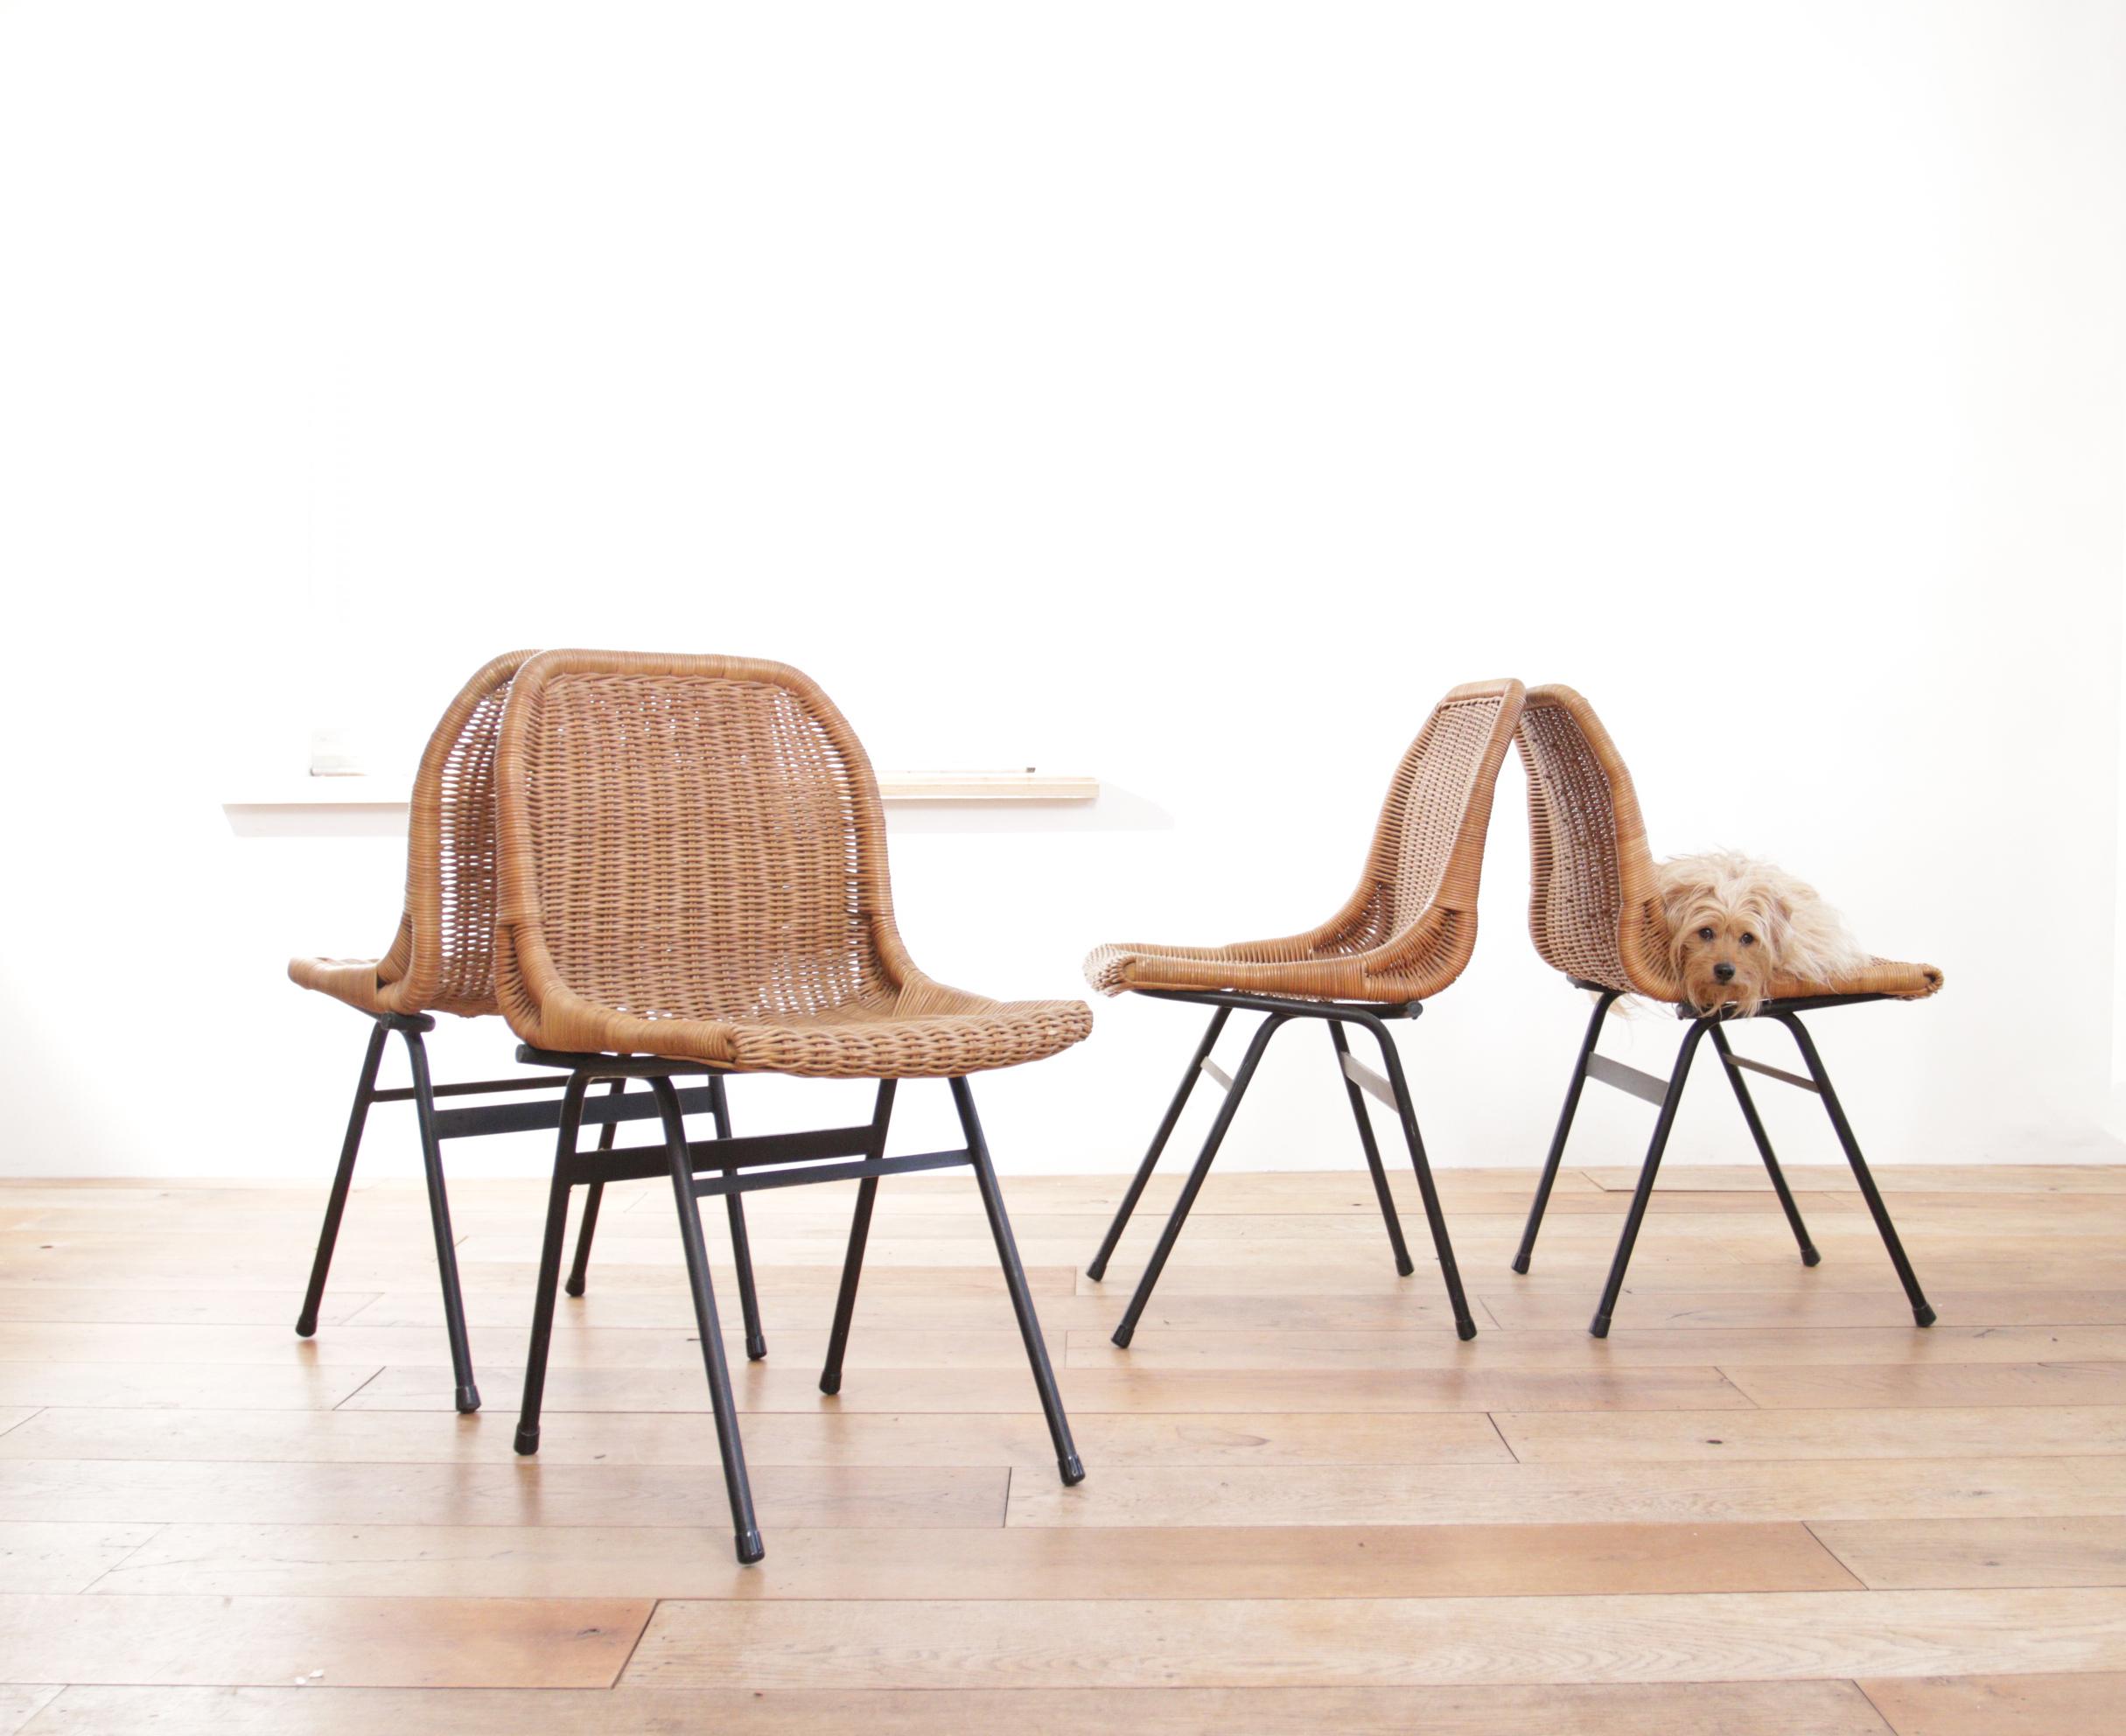 4 Beautiful chairs with a rattan seat and black coated metal base.

(1920-2010) Dirk van Sliedregt, important furniture designer, interior architect, teacher.

Fit perfectly with the designs of, among others: Charlotte Perriand, Le